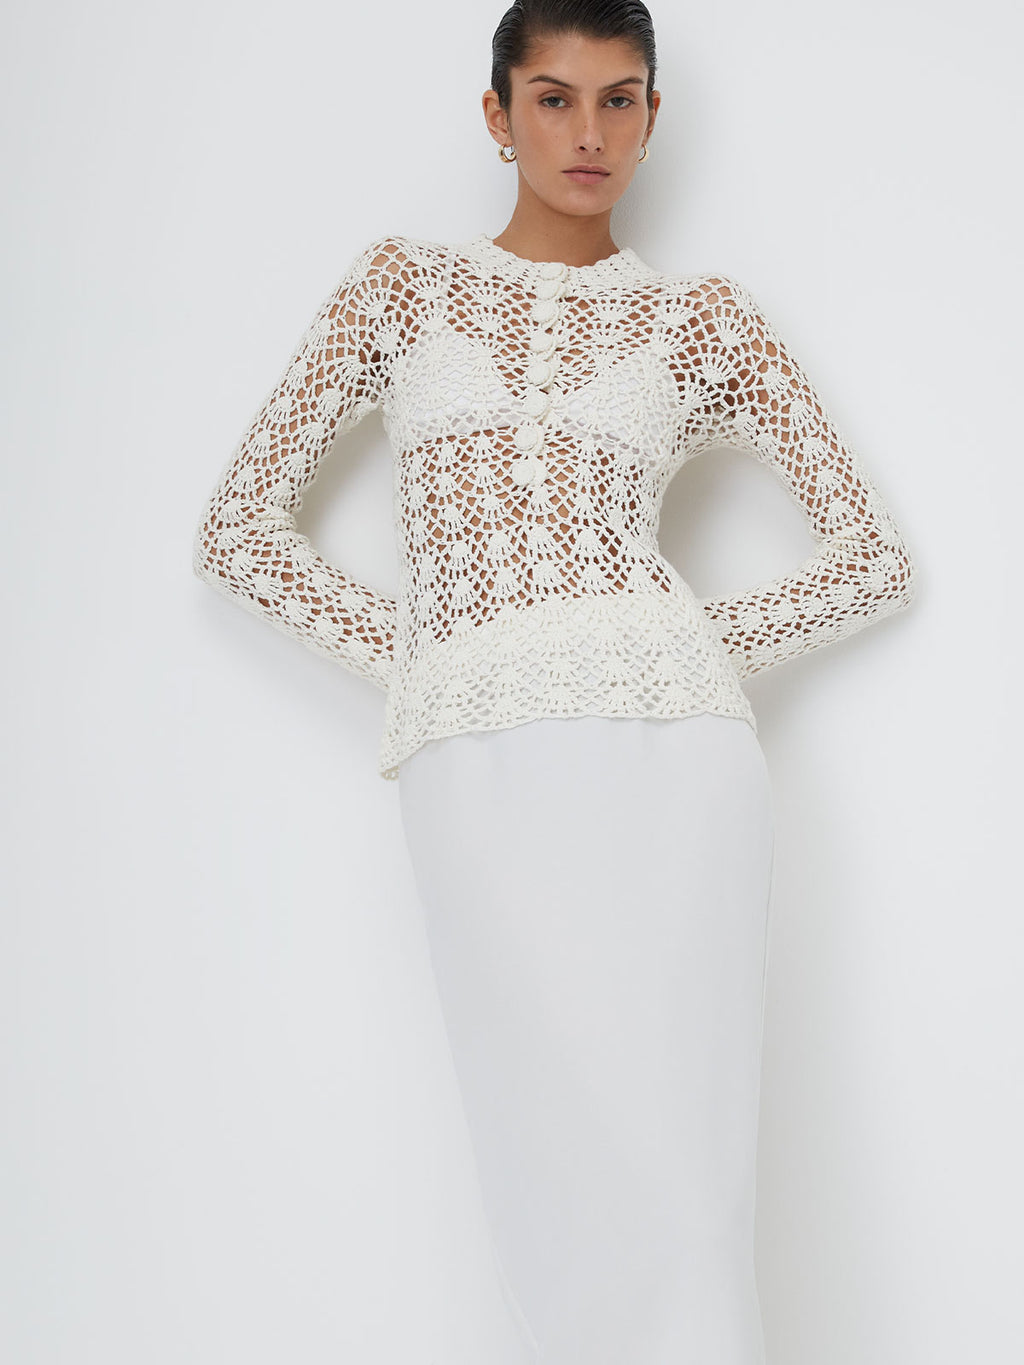 Model wearing the White 9 Crochet Top on top of a white background